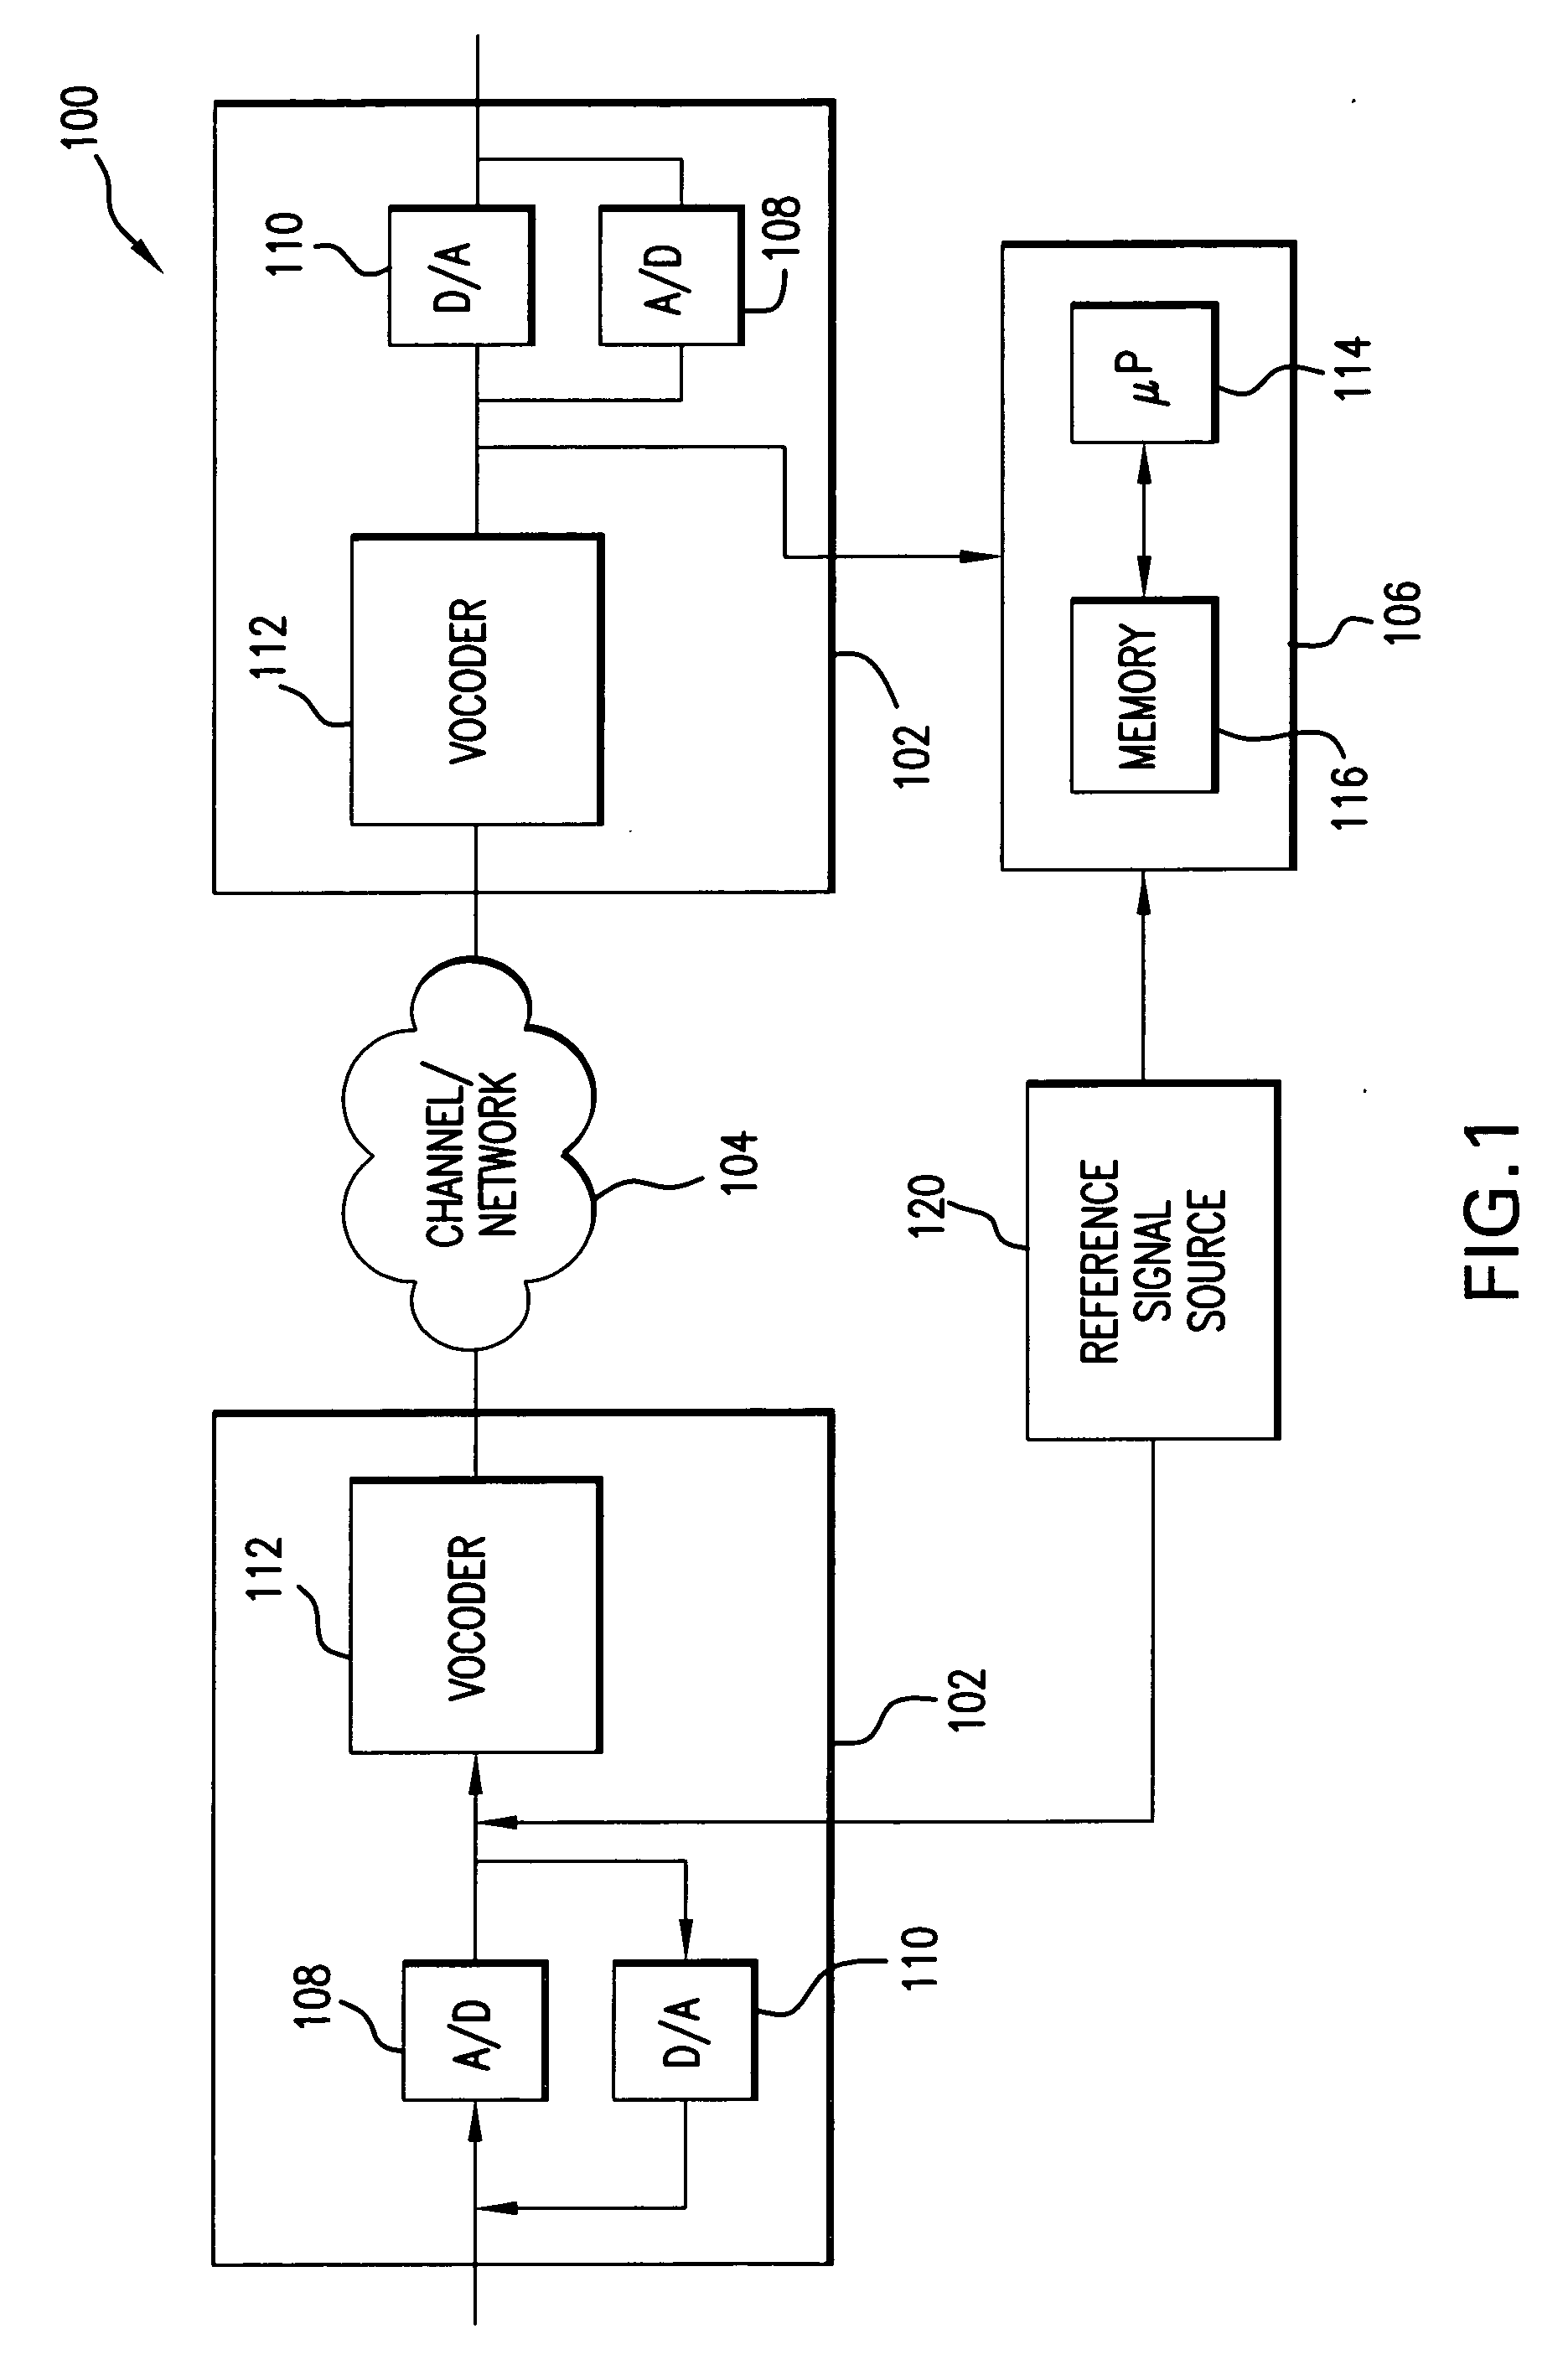 Method and apparatus for measuring the quality of speech transmissions that use speech compression